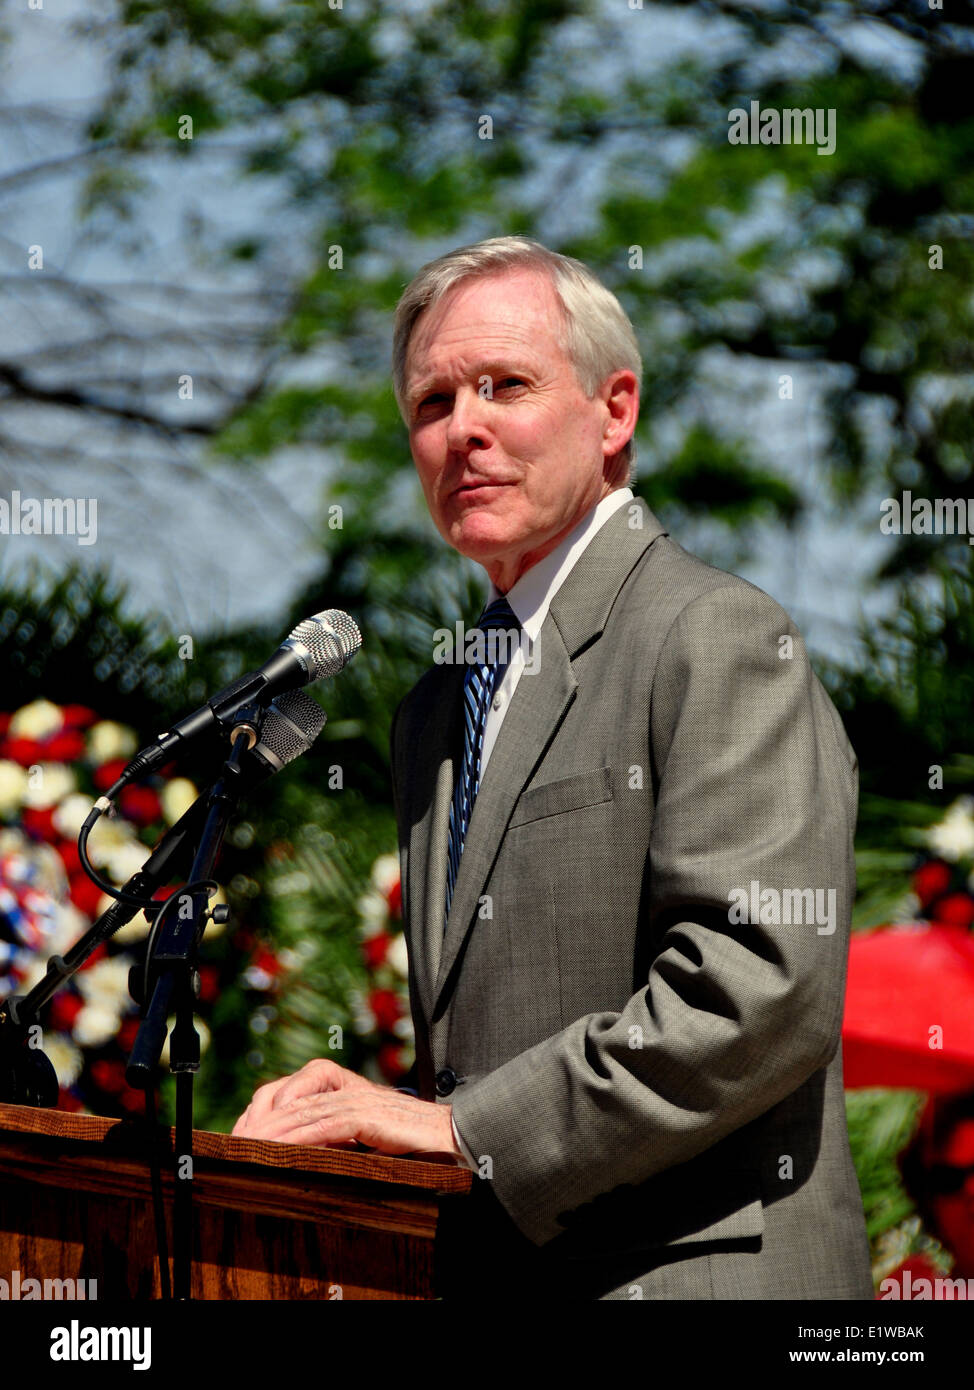 NYC: Secretary of the United States Navy Ray Mabus speaking at the ...